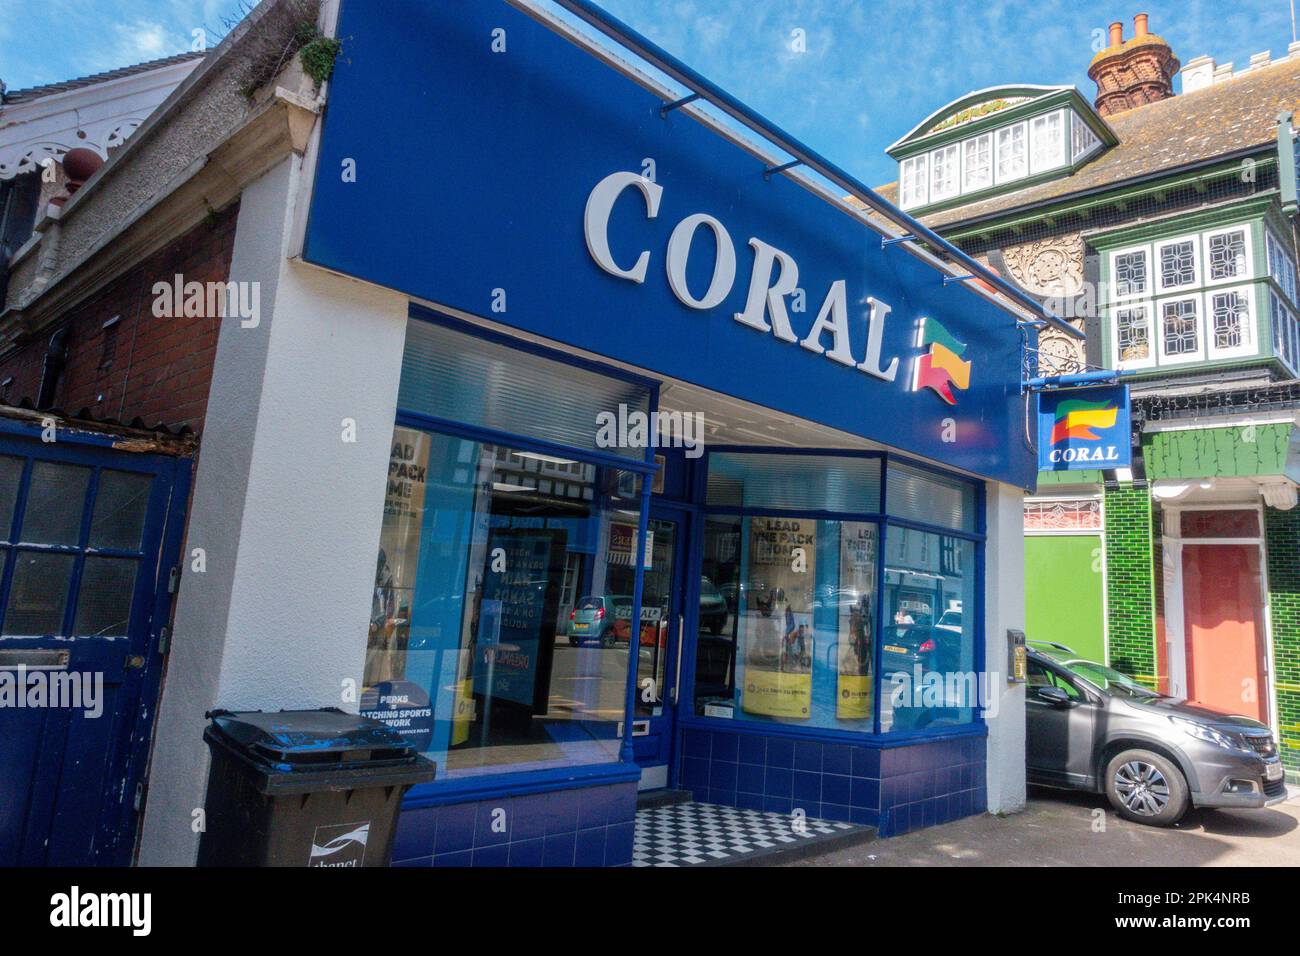 Coral,Bookmaker,Betting Shop,St Mildreds Road,Westgate on Sea,Kent Stock Photo